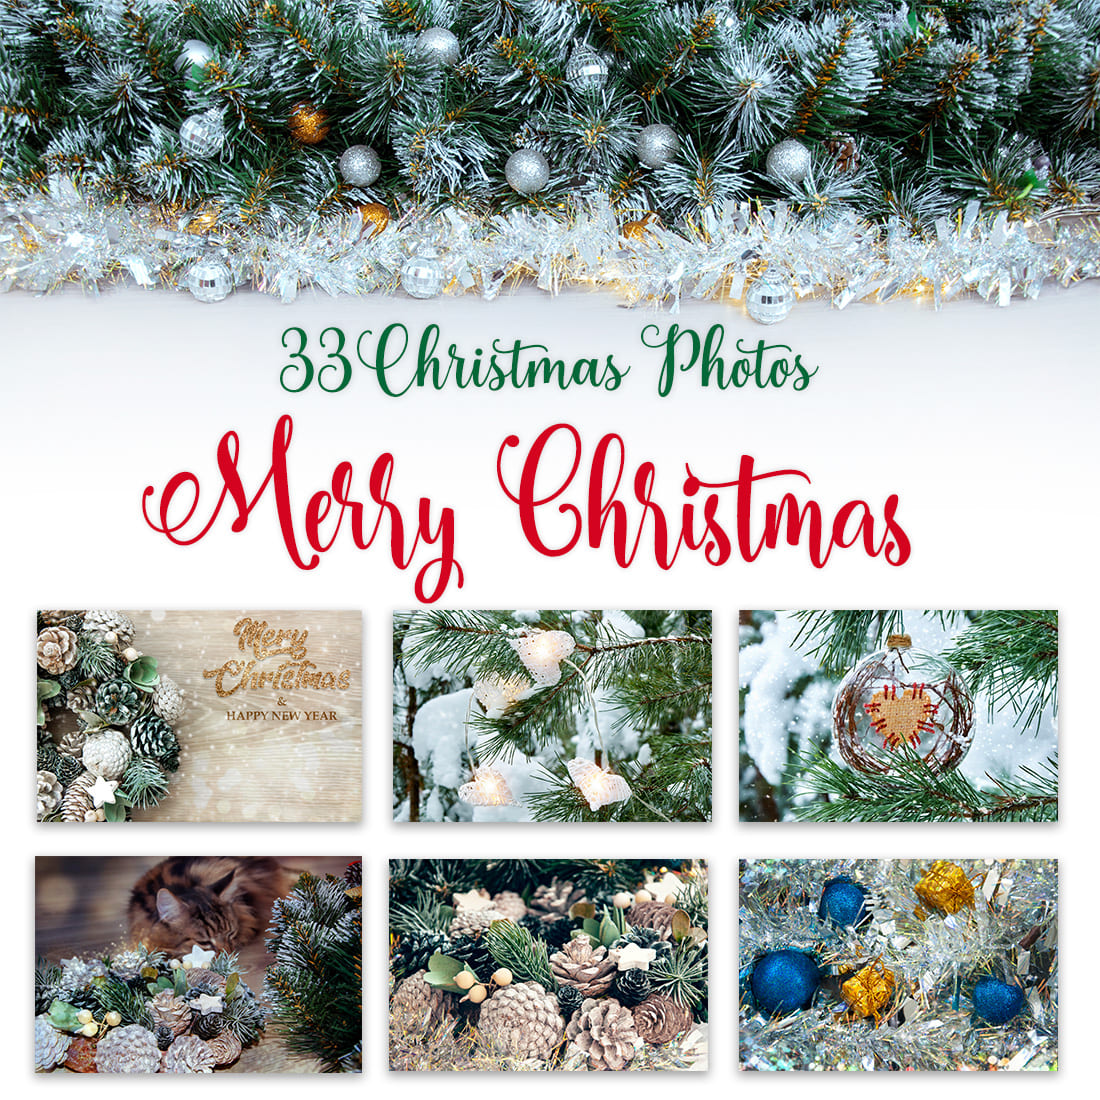 Christmas Photos and Backgrounds Set cover image.